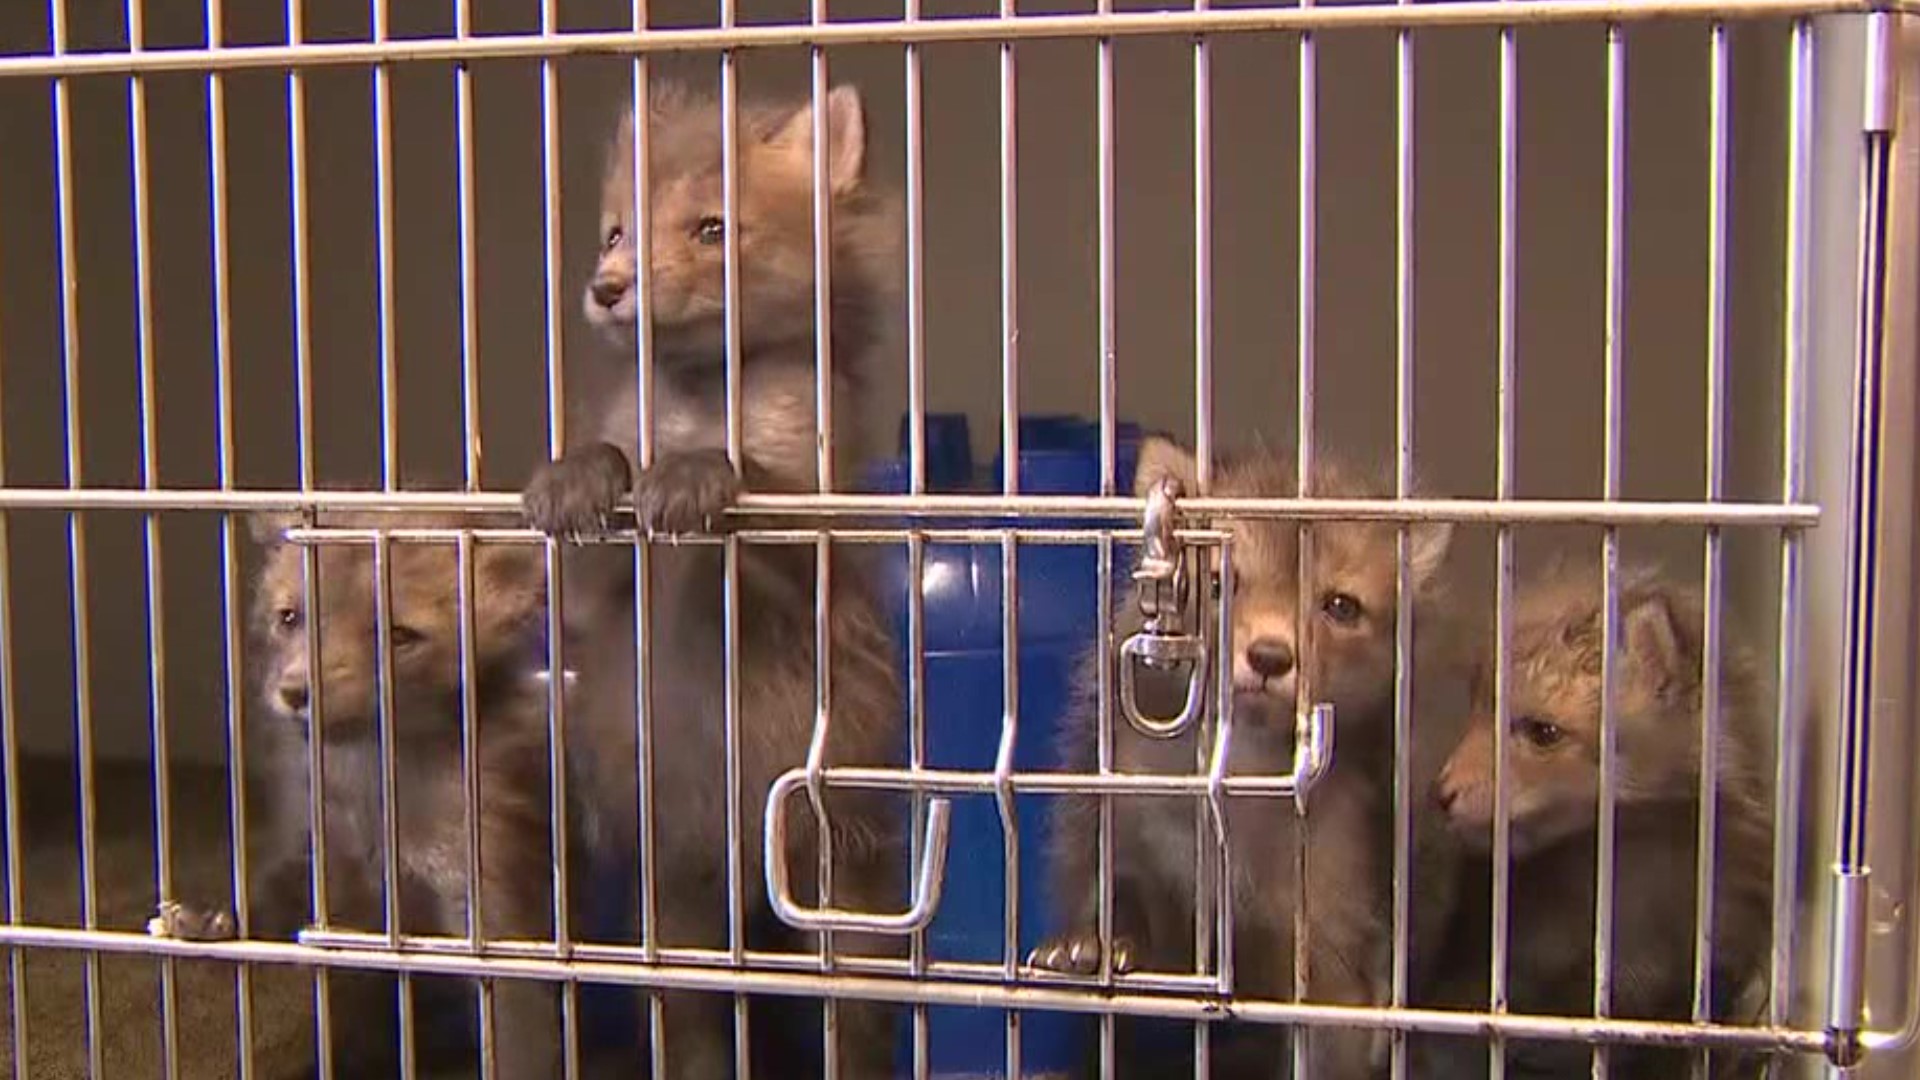 Currently, there is no state funding to help Wildlife rehabilitation centers